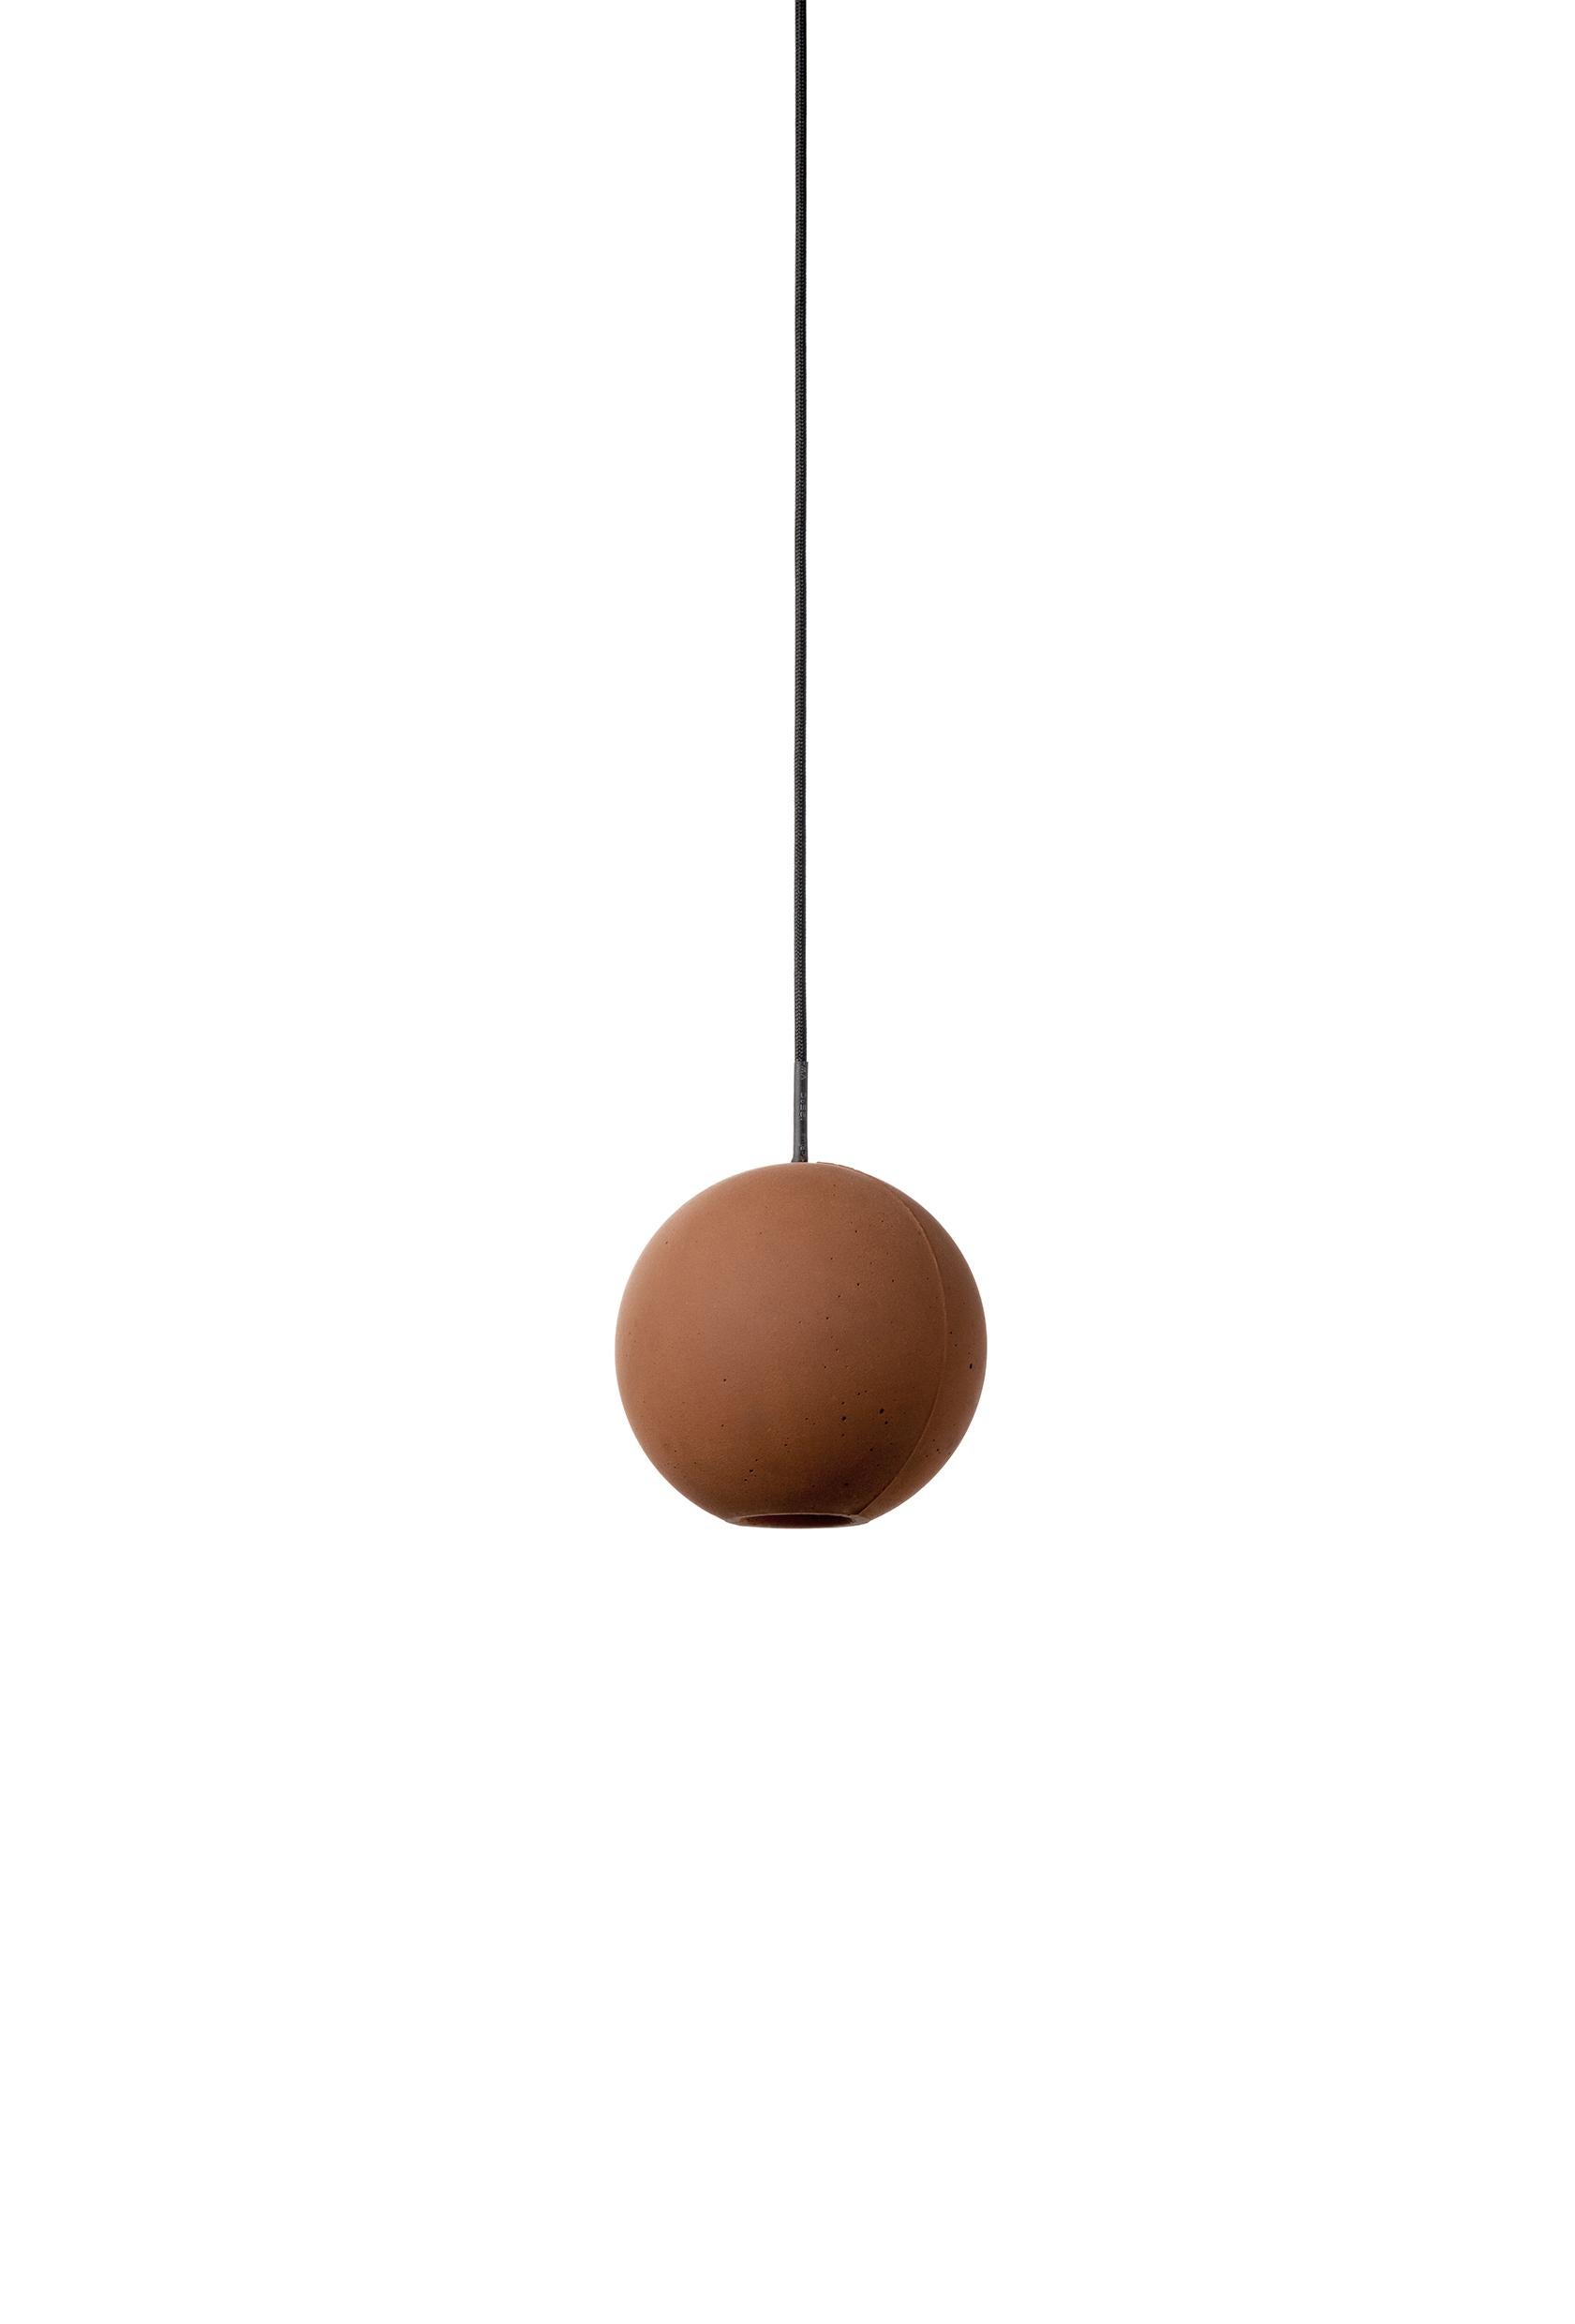 Pendant lamp 'E-mars' by Nongzao x Bentu Design.
Material: Terracotta 
Color: Earthy brown 

Measures: 10.2 cm high, 9.8 cm diameter
Wire: 3 meters (black)
Lamp type: AC 100-240V 50-60Hz 9W - Comptable with US electric